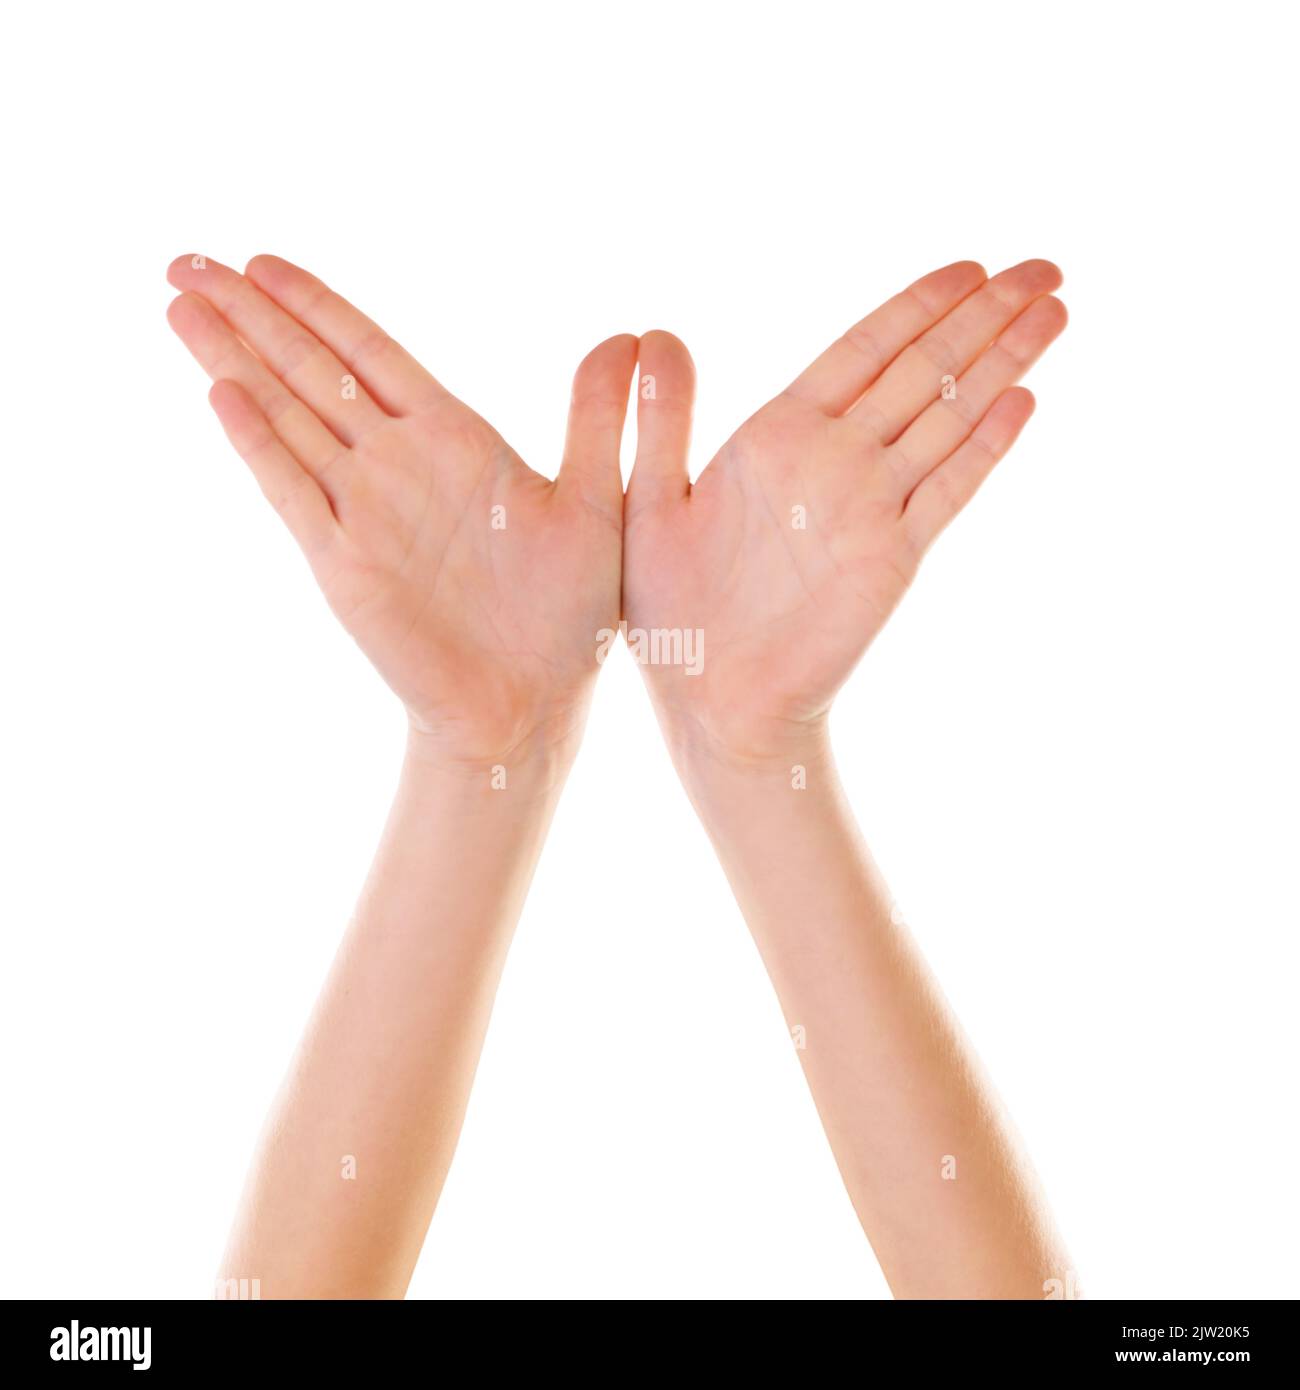 Fly away. hands showing a gesture isolated on white. Stock Photo